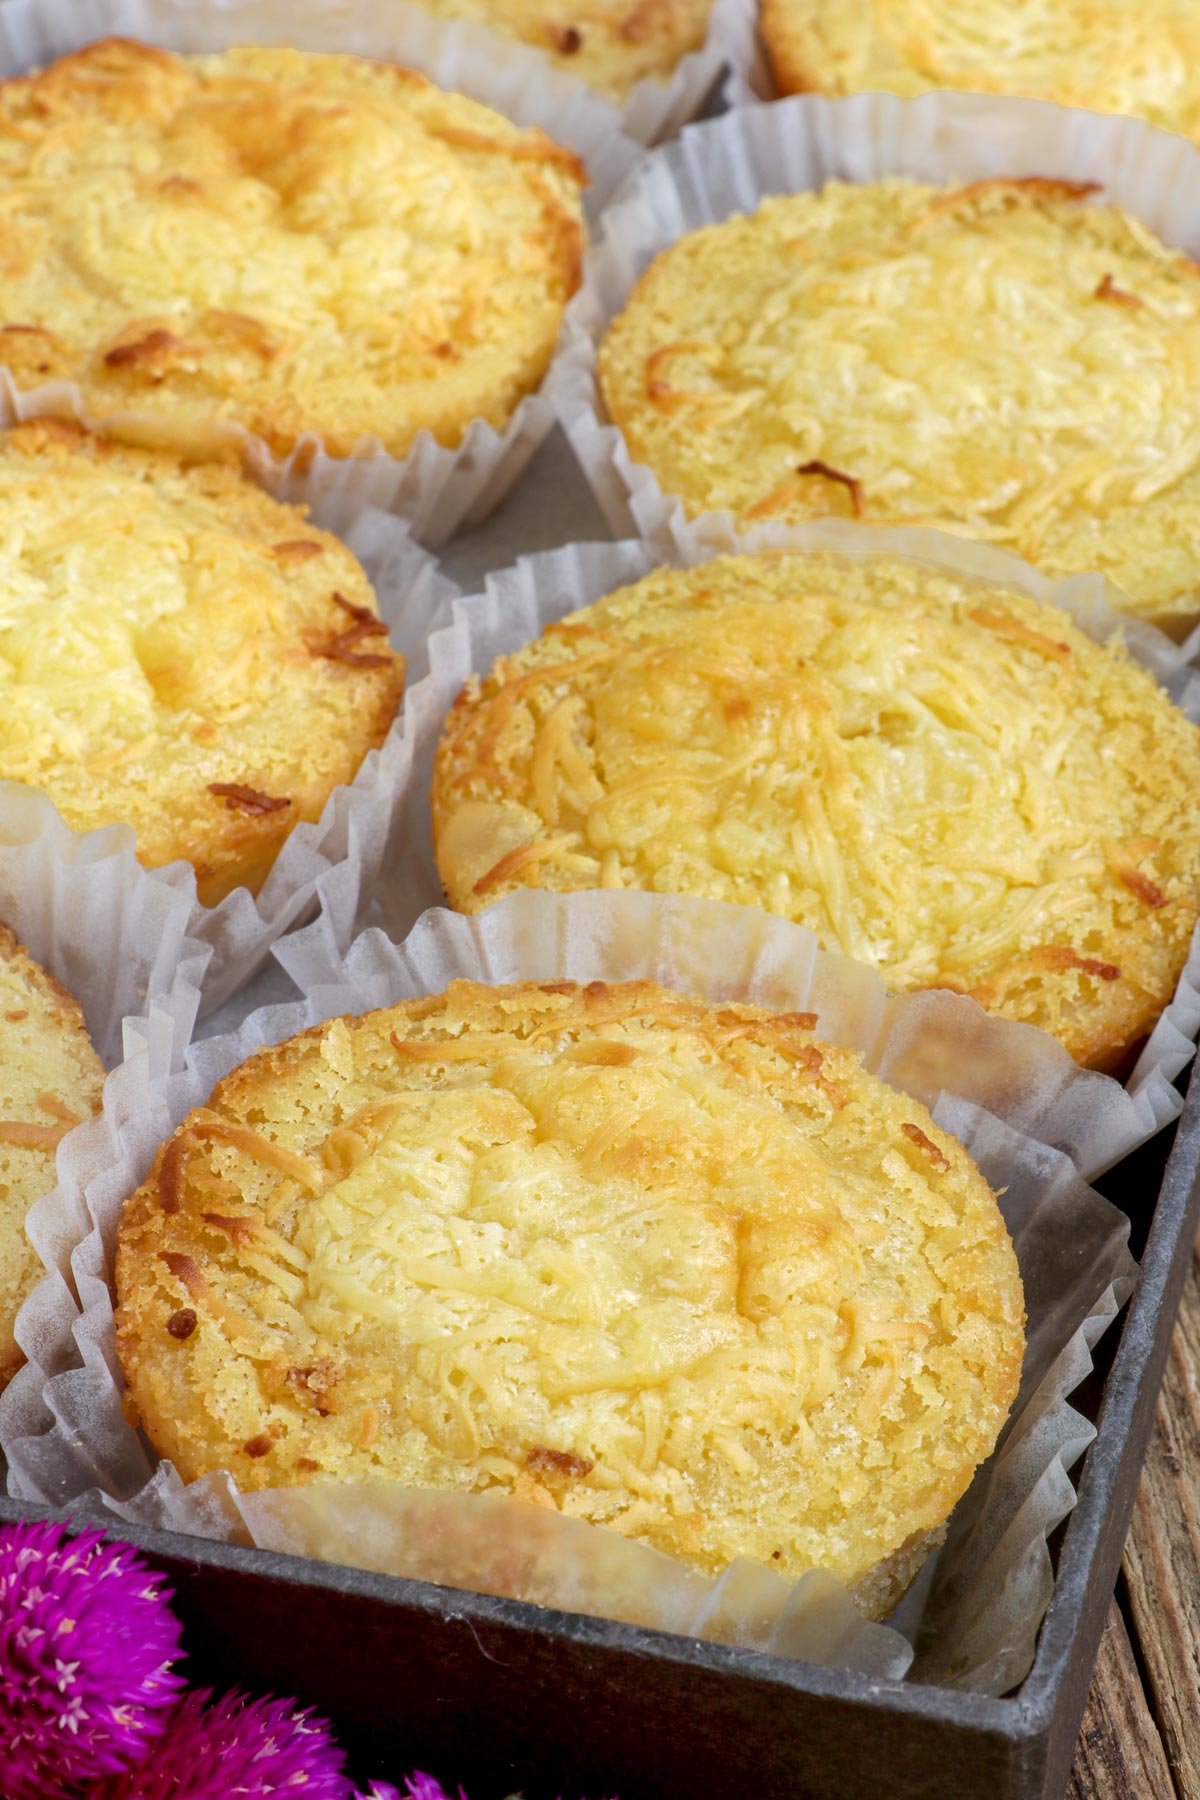 Royal Bibingka, a baked sticky rice cake with cheese toppings.